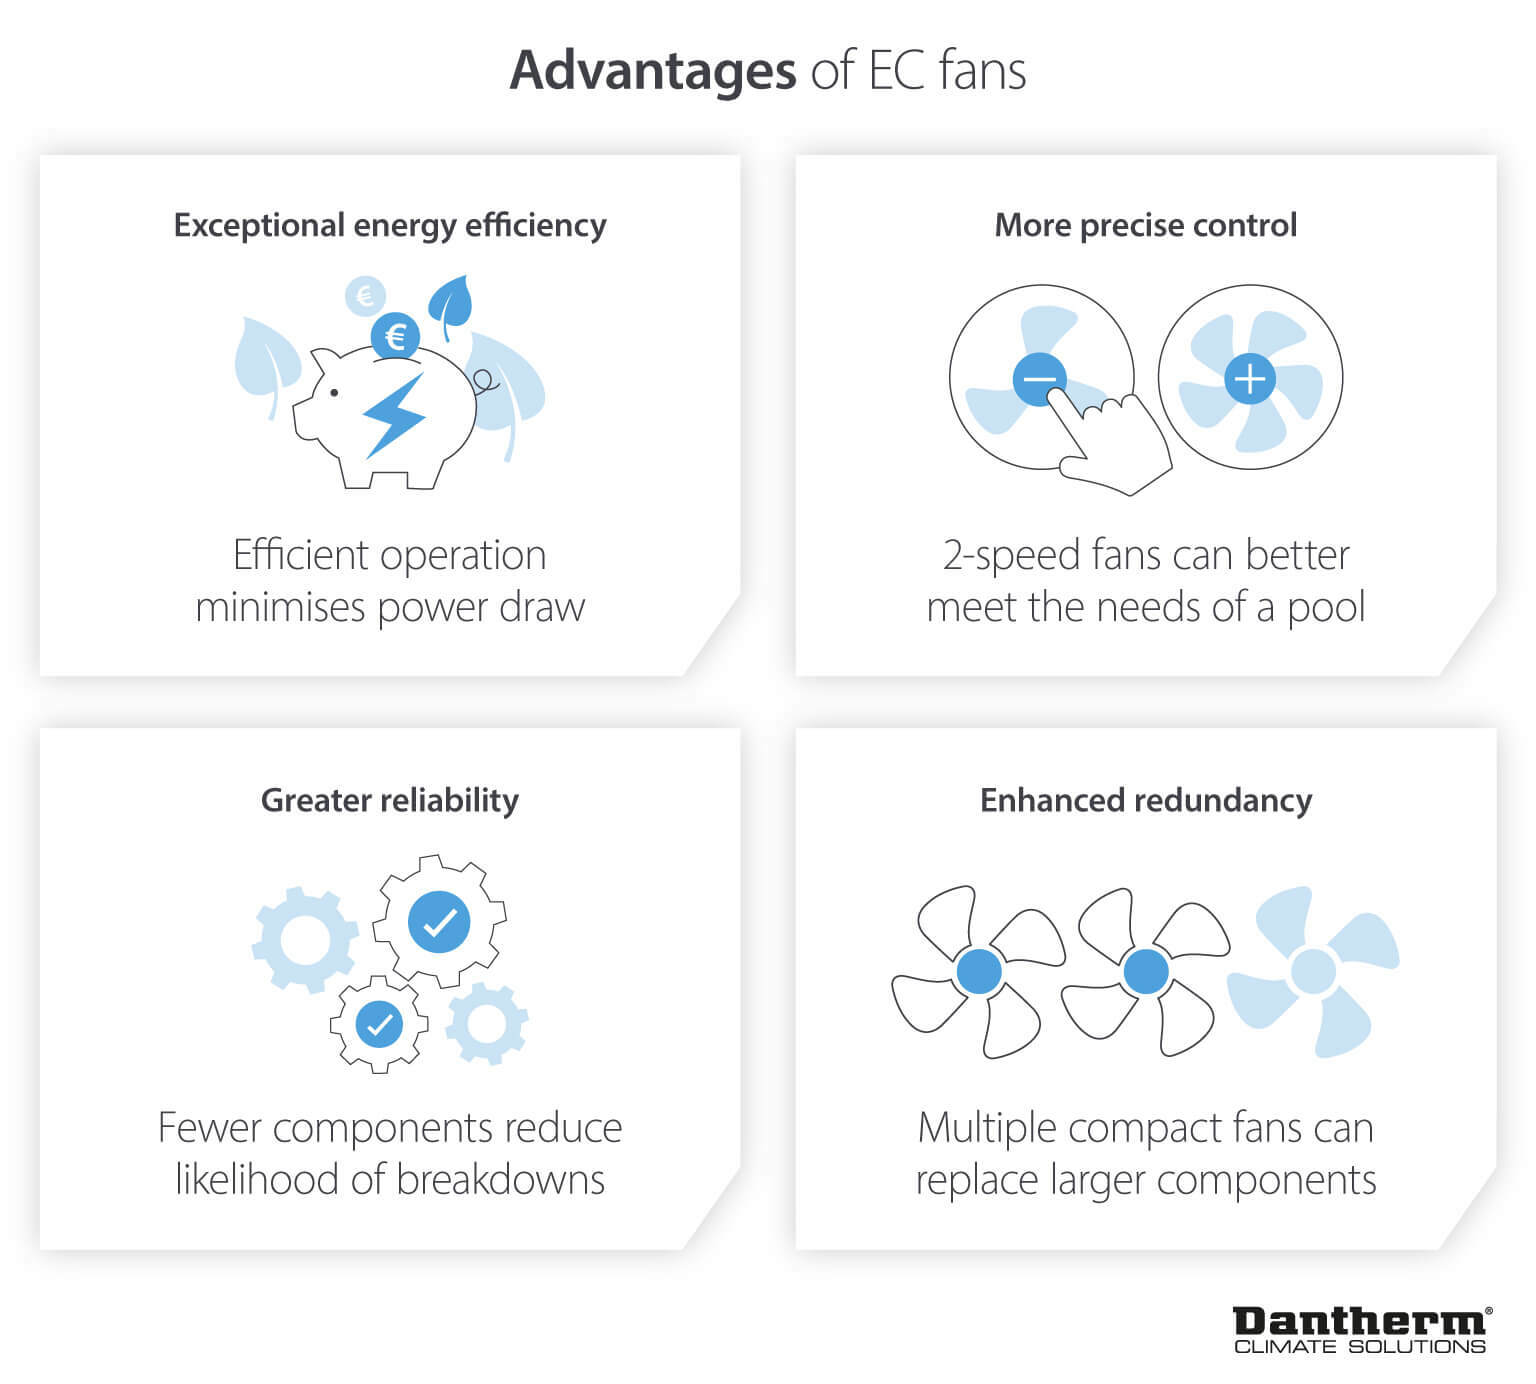 Advantage of using EC fans for Air Handling Units energy efficiency - Dantherm infographic image